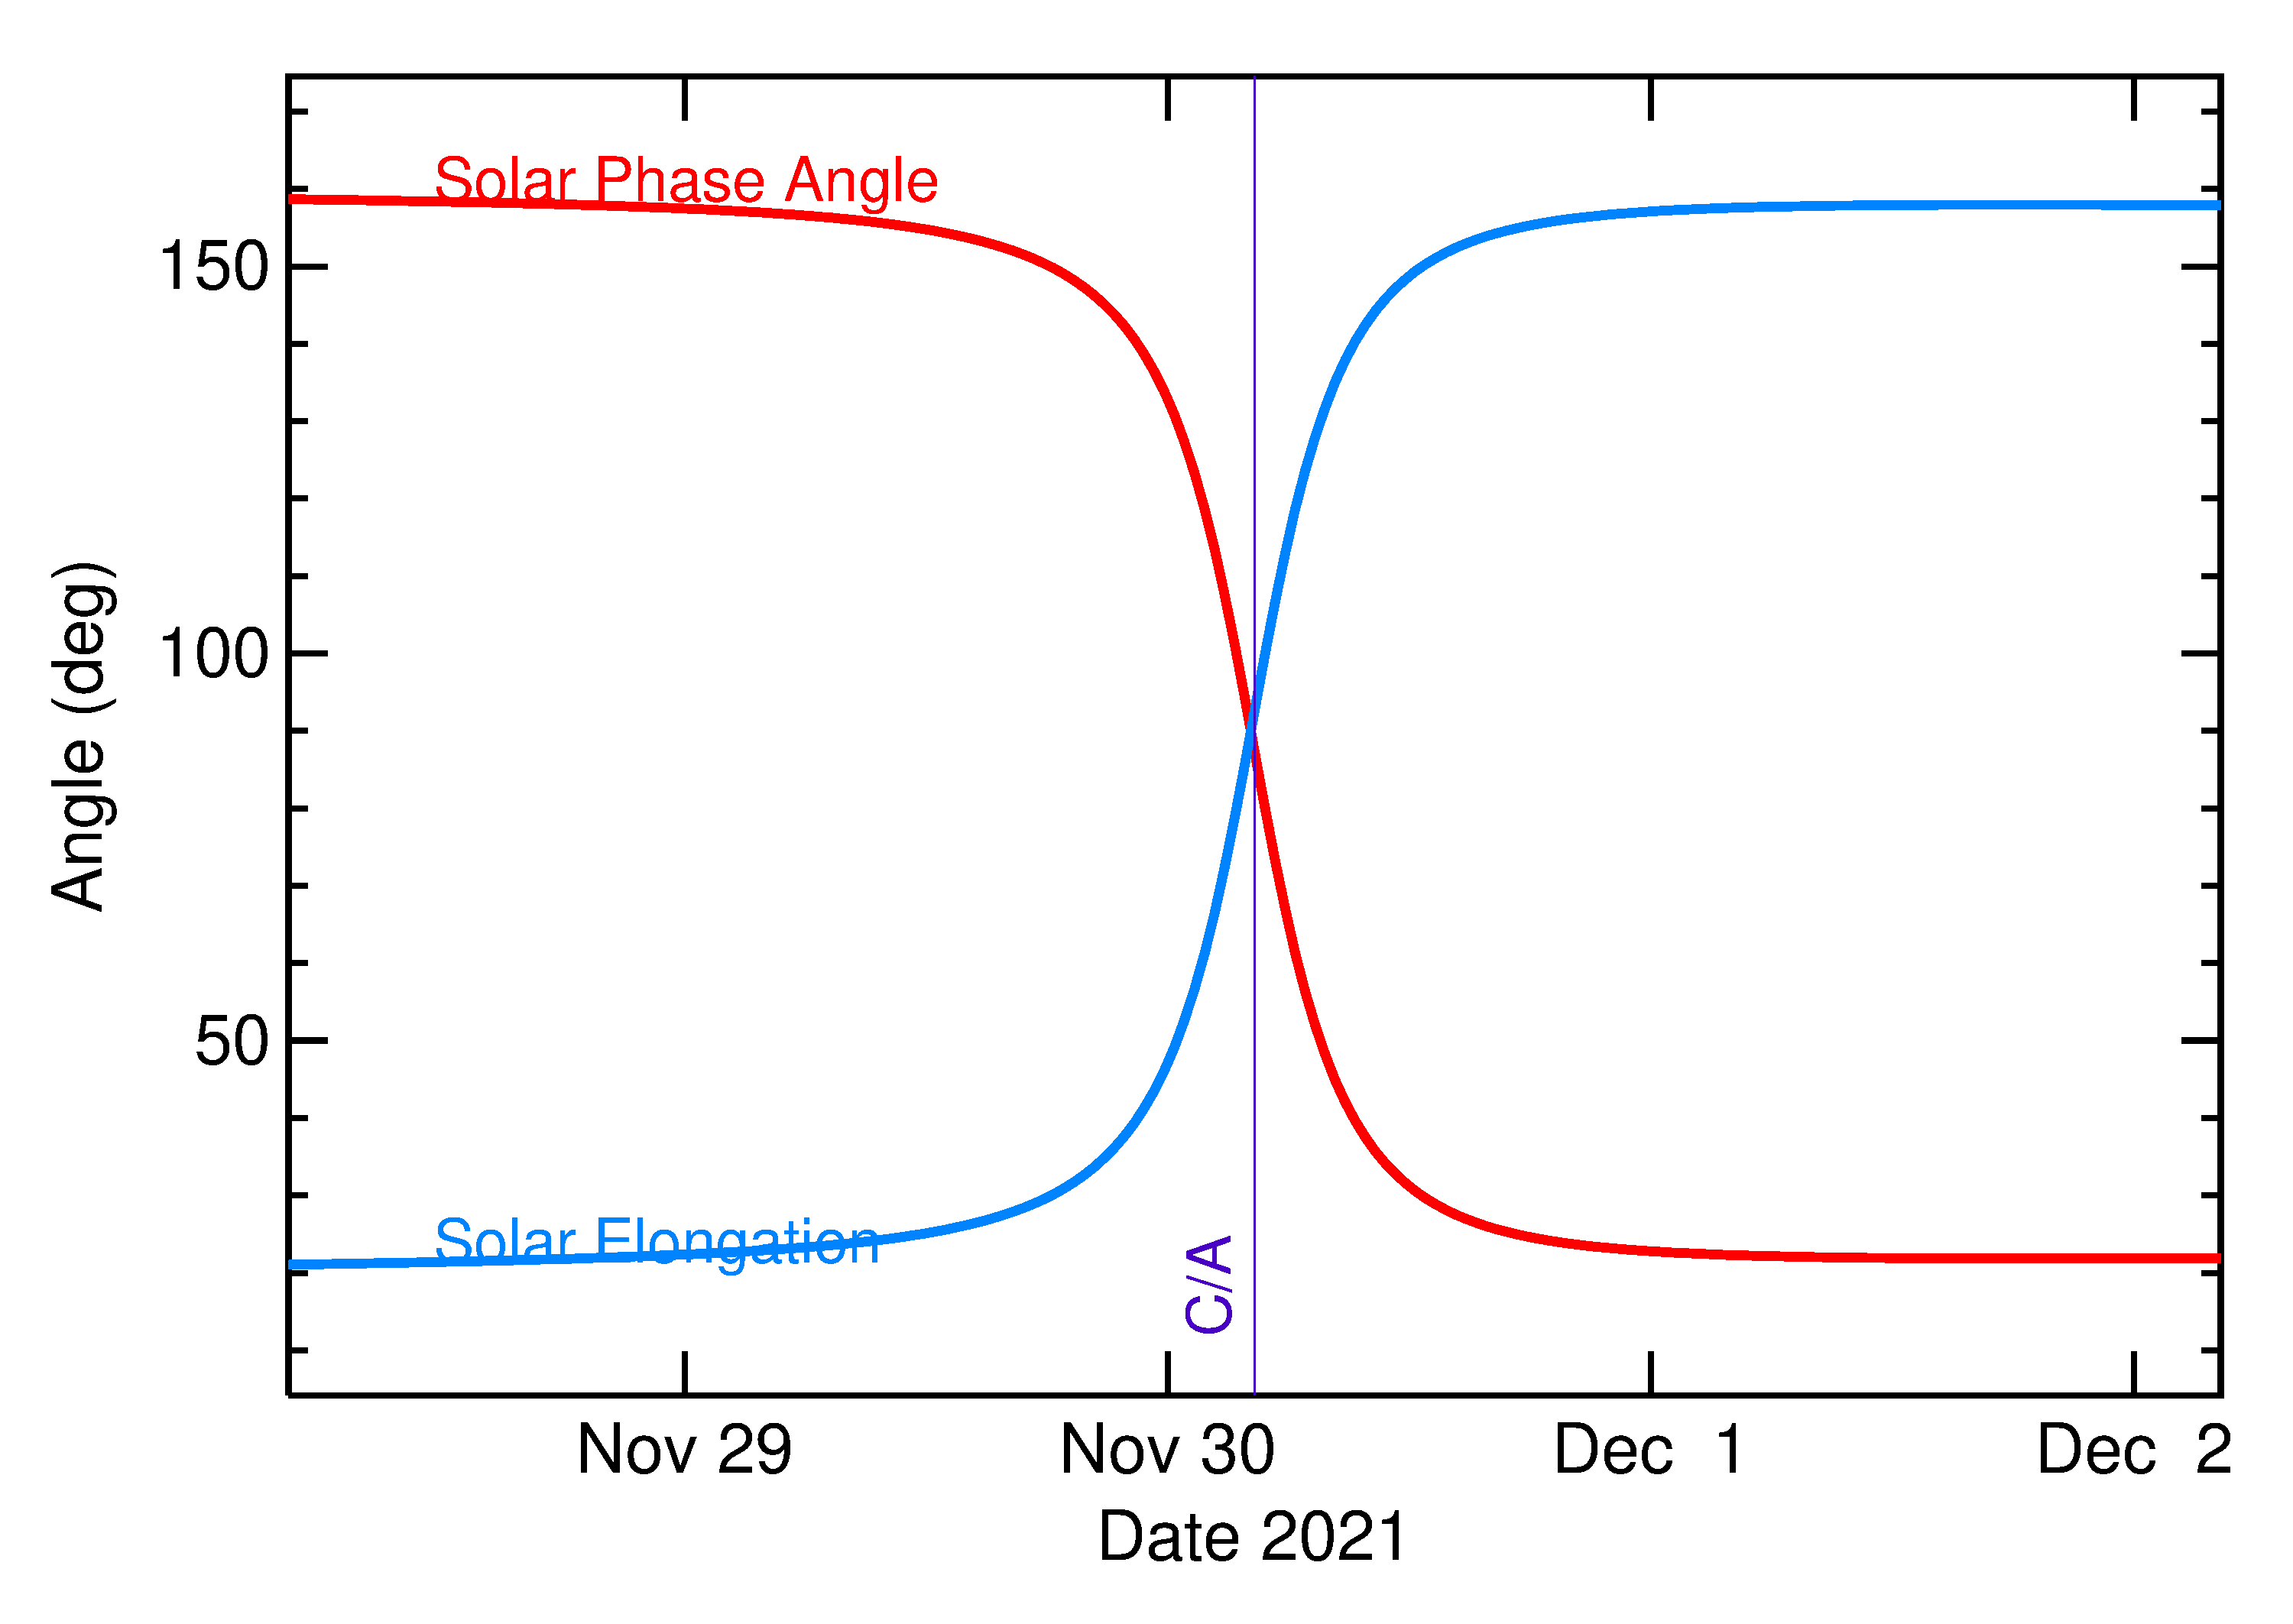 Solar Elongation and Solar Phase Angle of 2021 XV in the days around closest approach